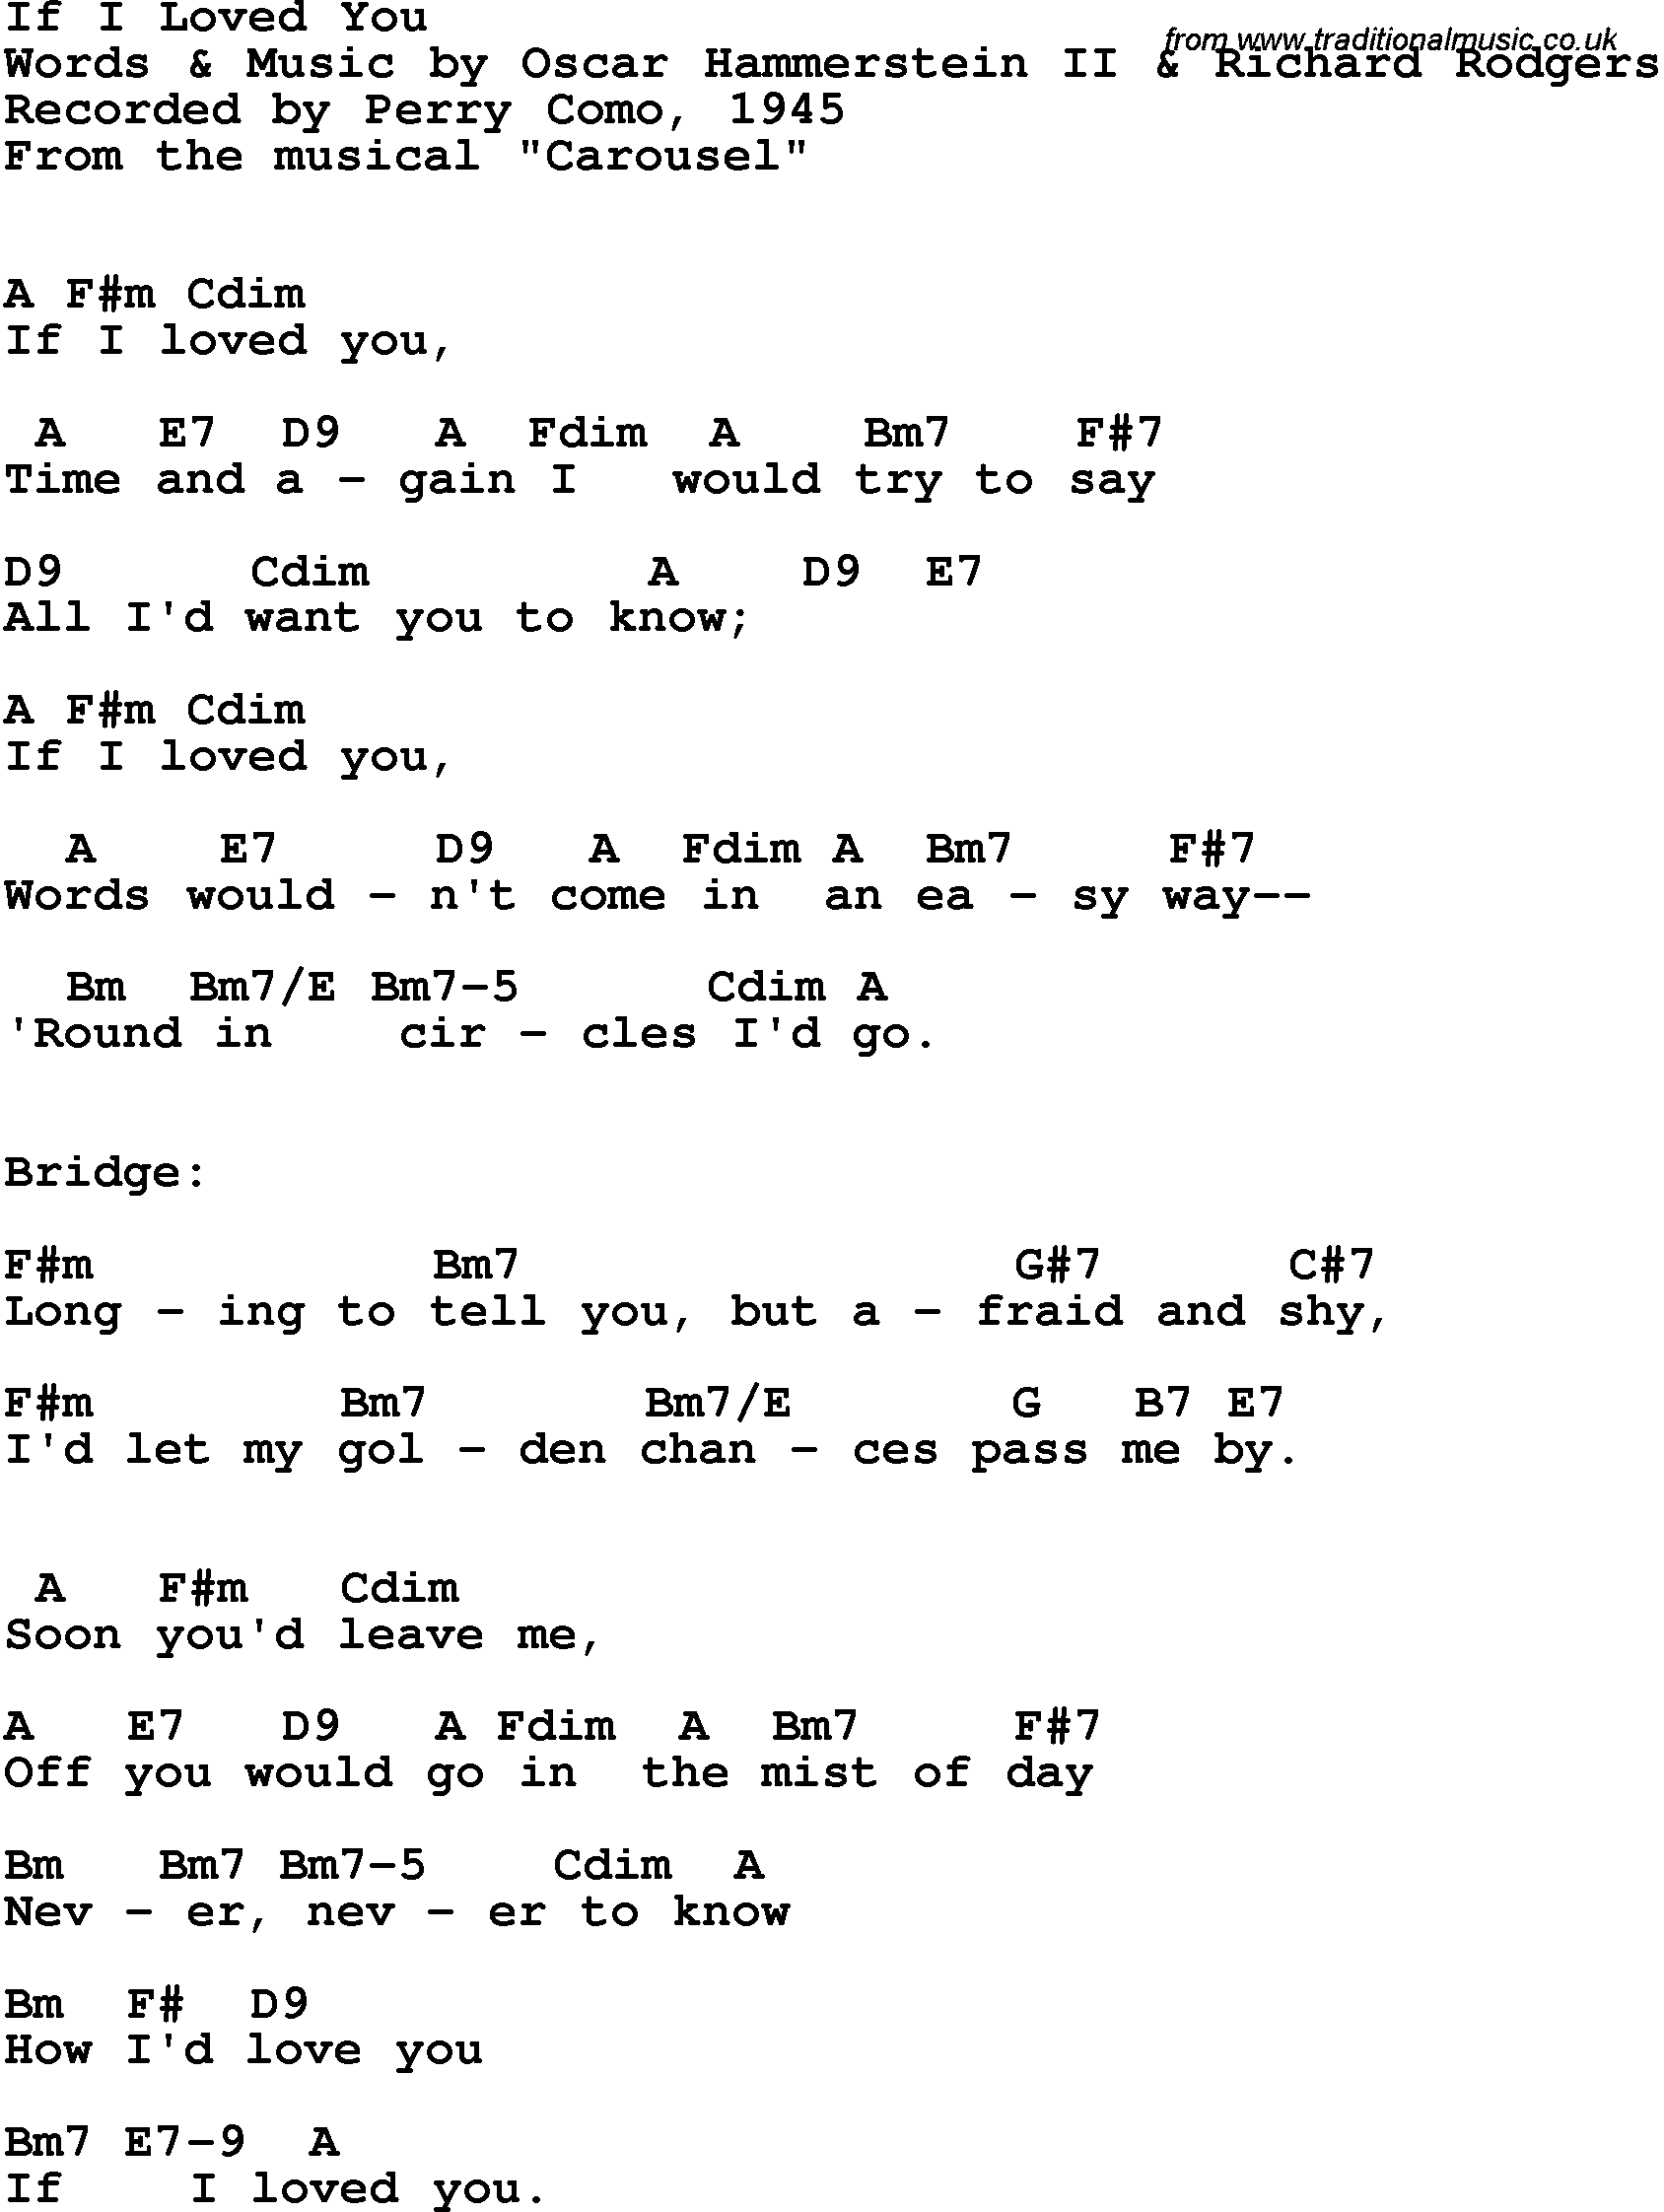 Song Lyrics with guitar chords for If I Loved You - Perry Como, 1945